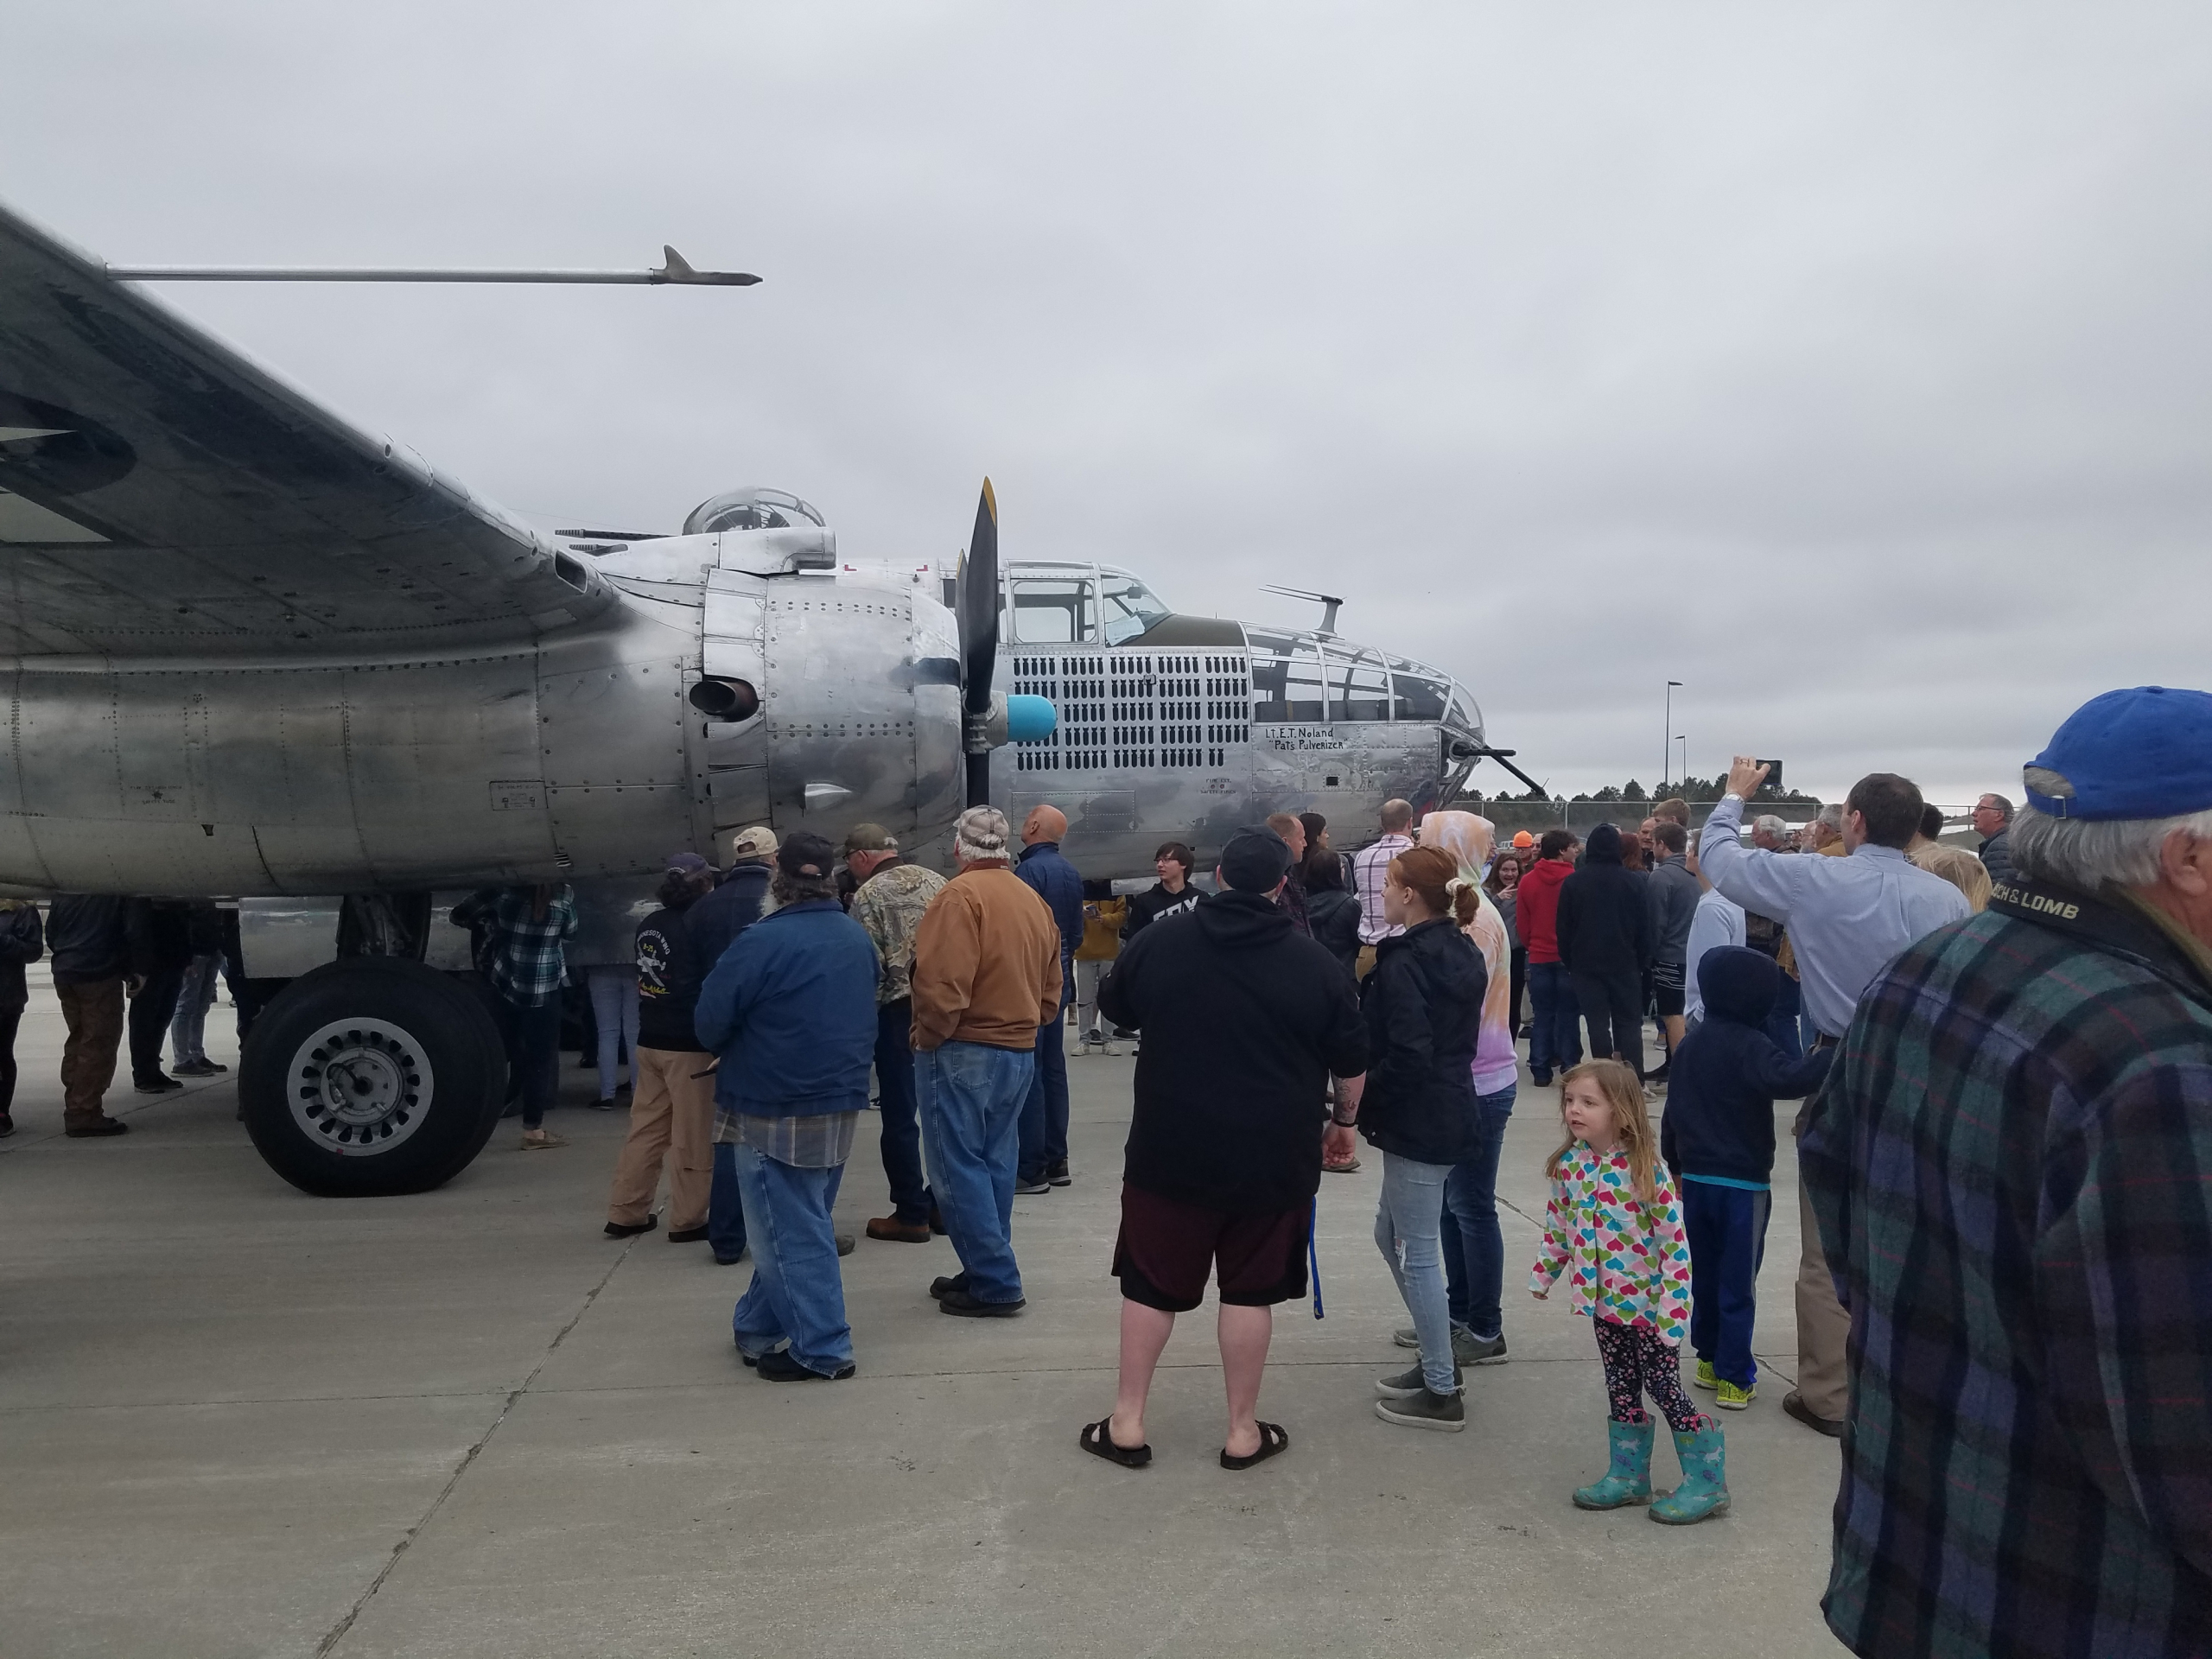 Historic B-25 “Doolittle” Bomber To Make May Stop At Pierre Regional Airport